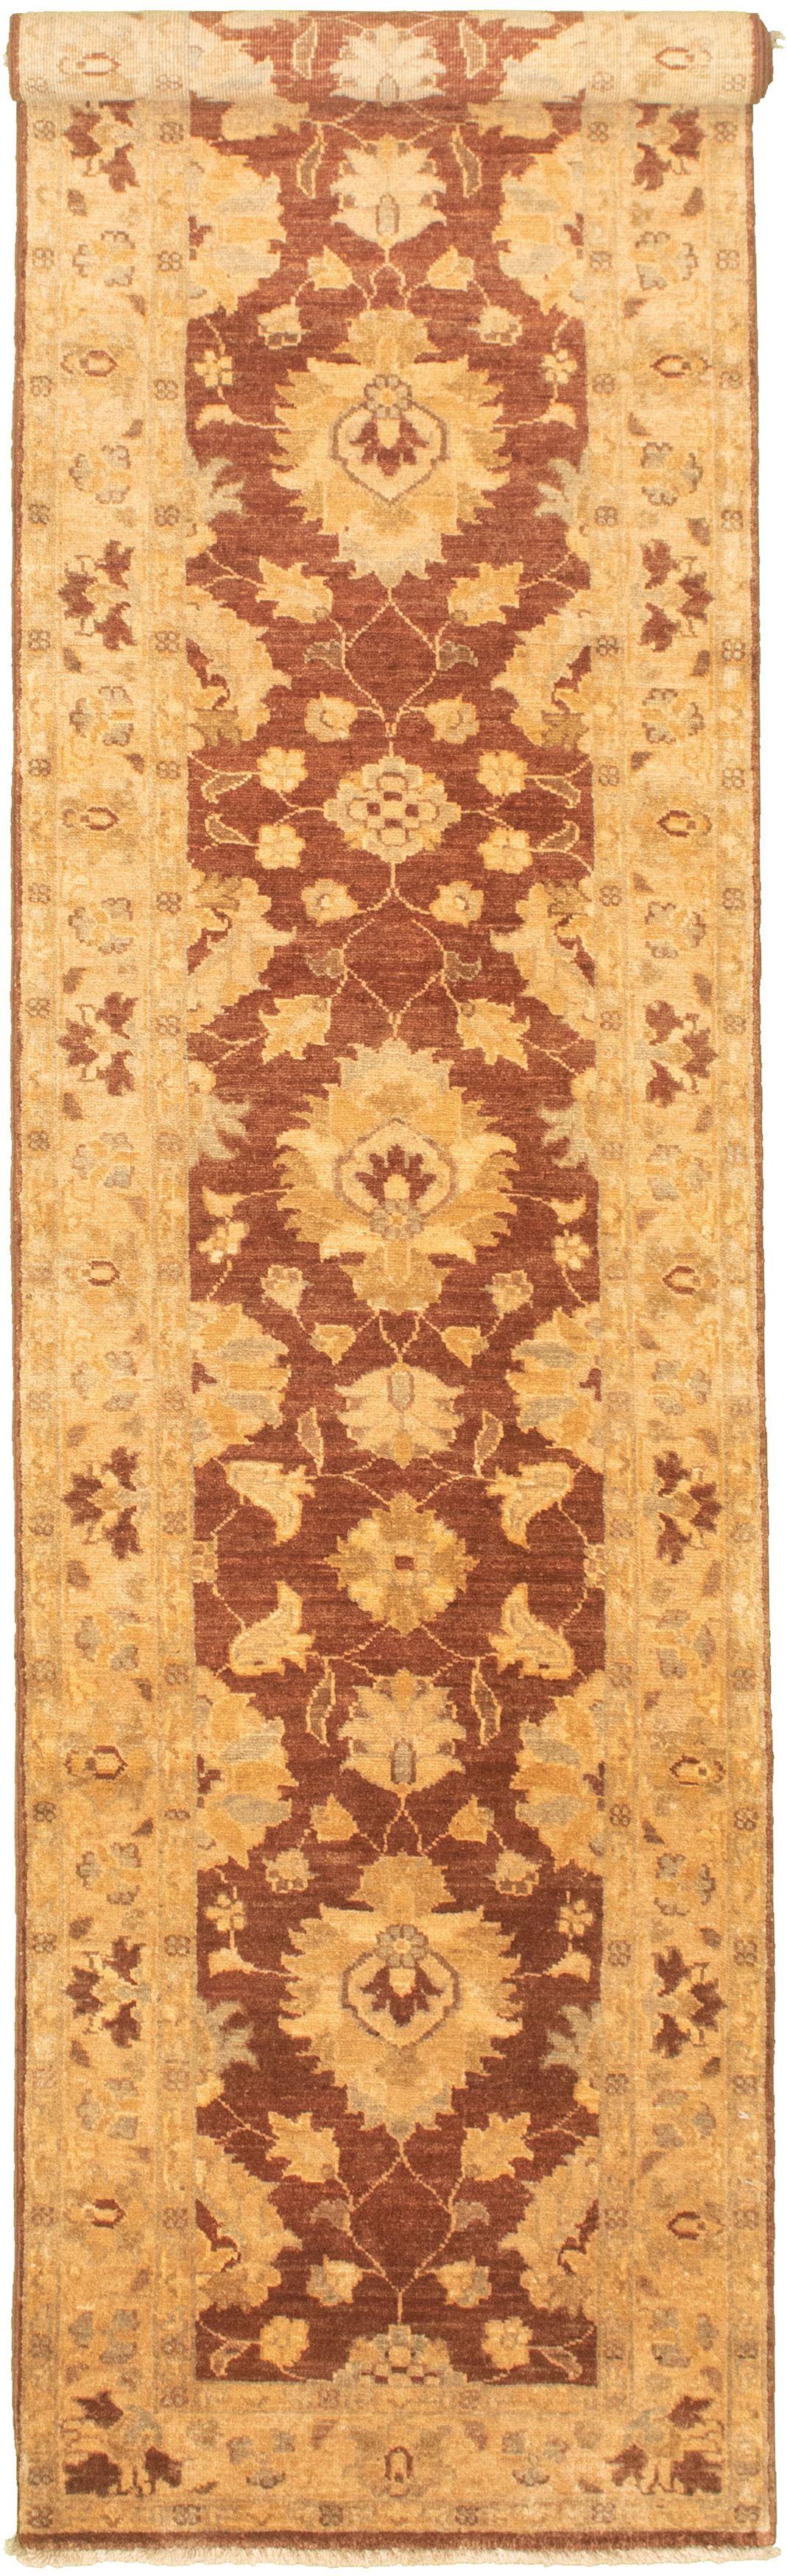 Hand-knotted Chobi Finest Brown Wool Rug 2'5" x 12'8" Size: 2'5" x 12'8"  